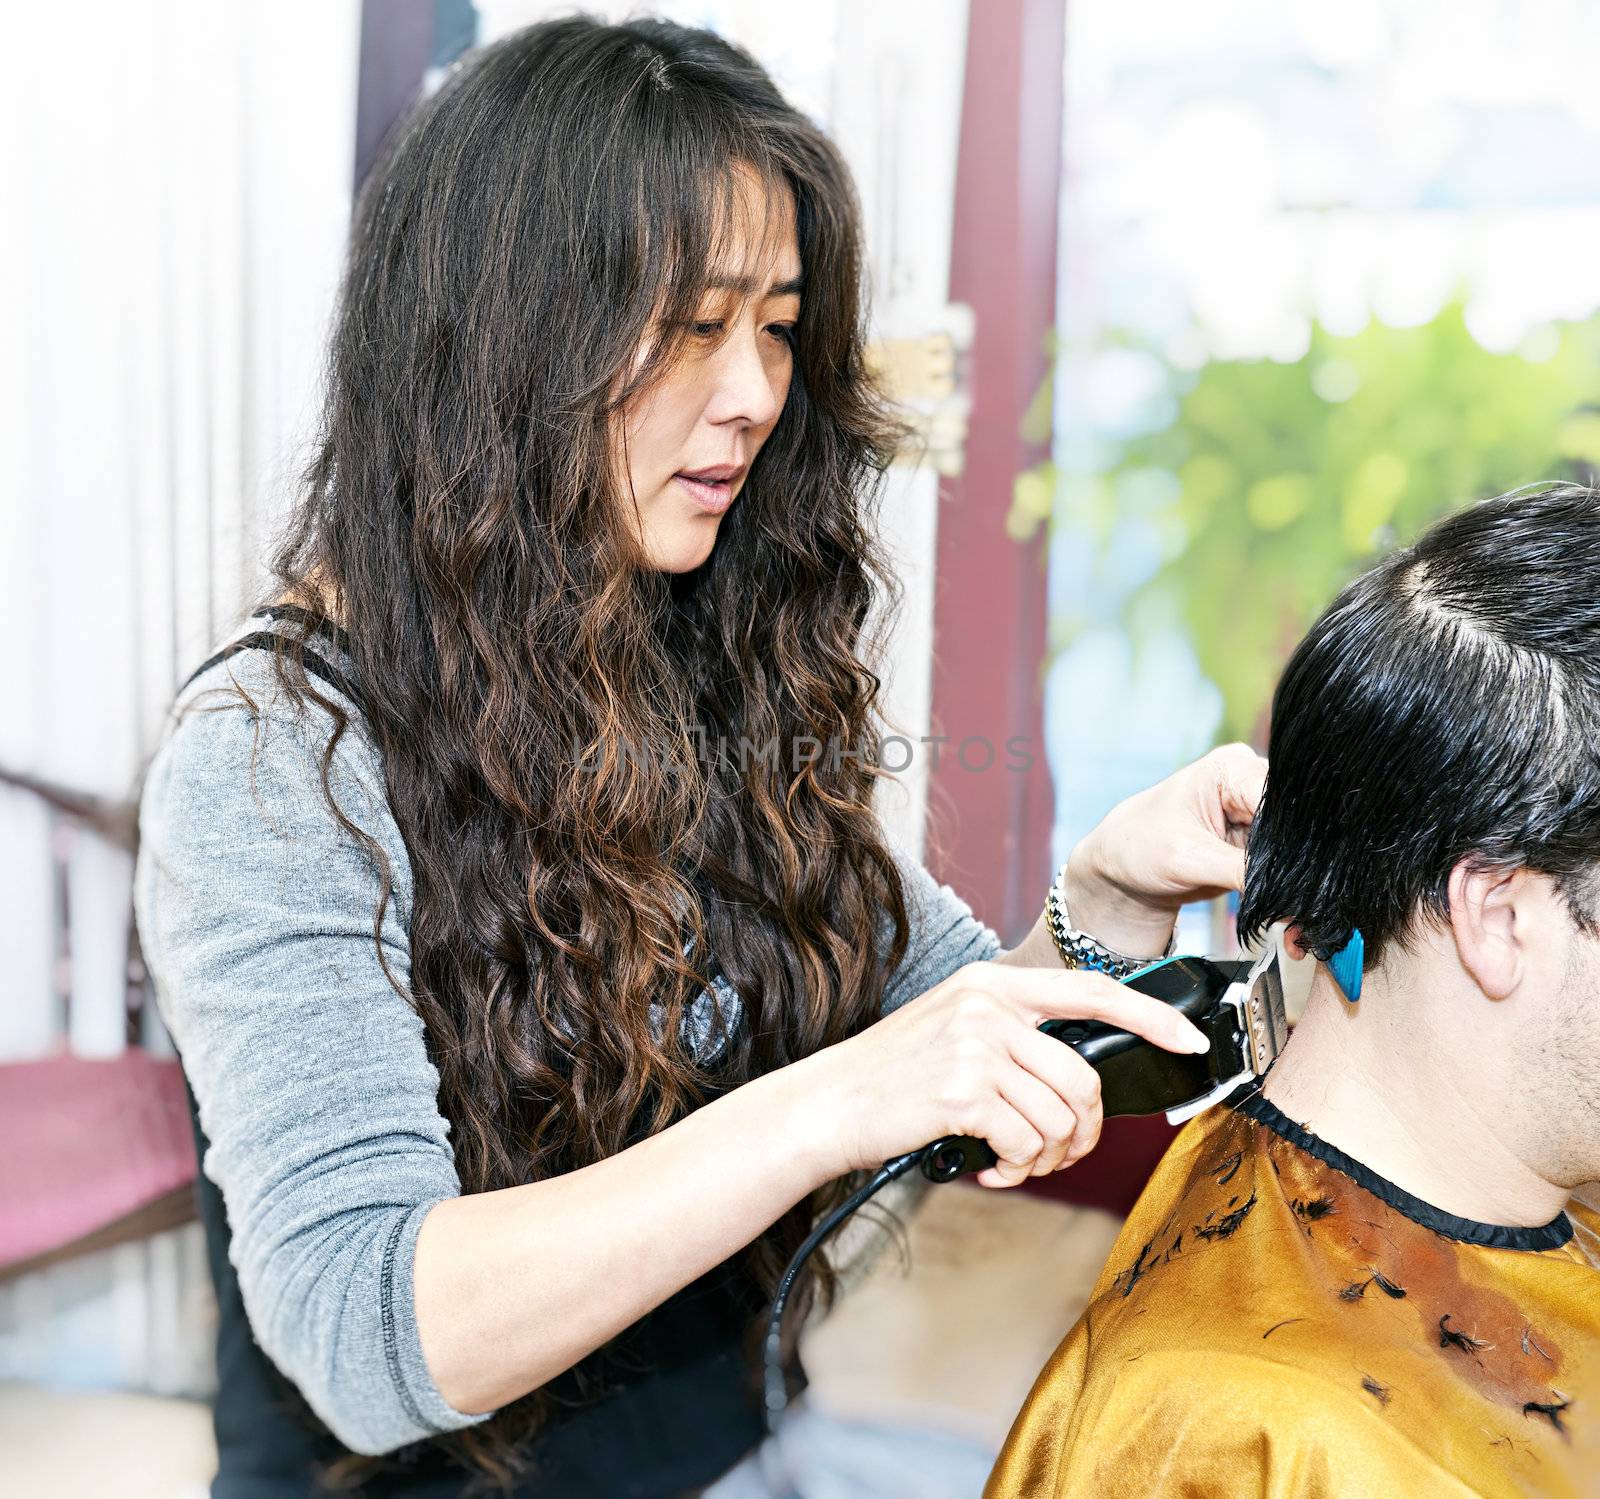 Hairdresser cutting hair in her salon with trimmer